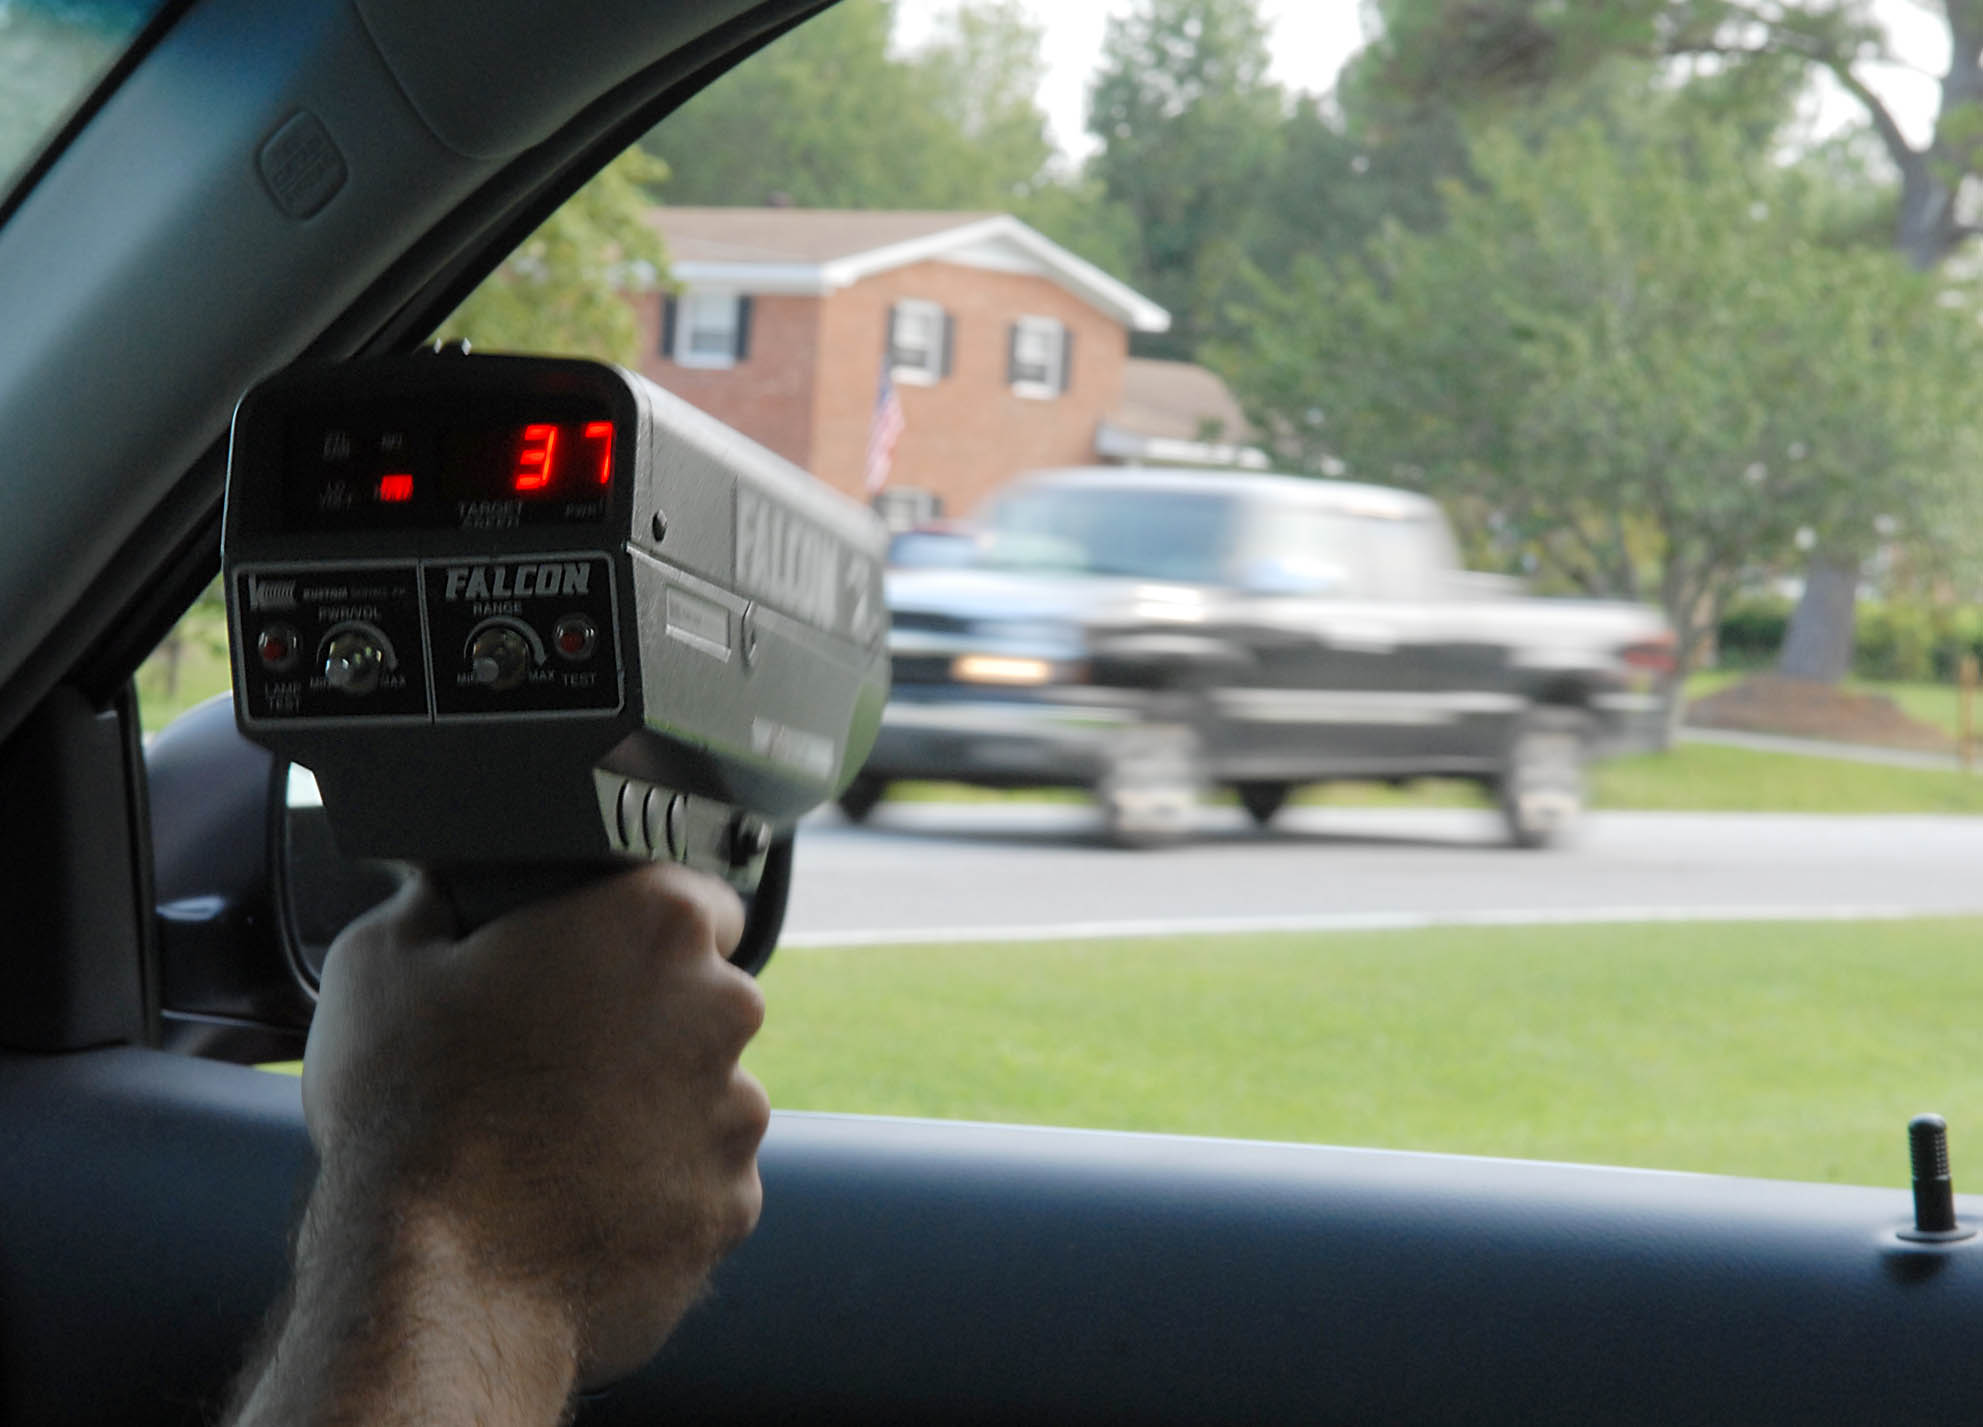 MyReporter.com How accurate is police radar when two ...